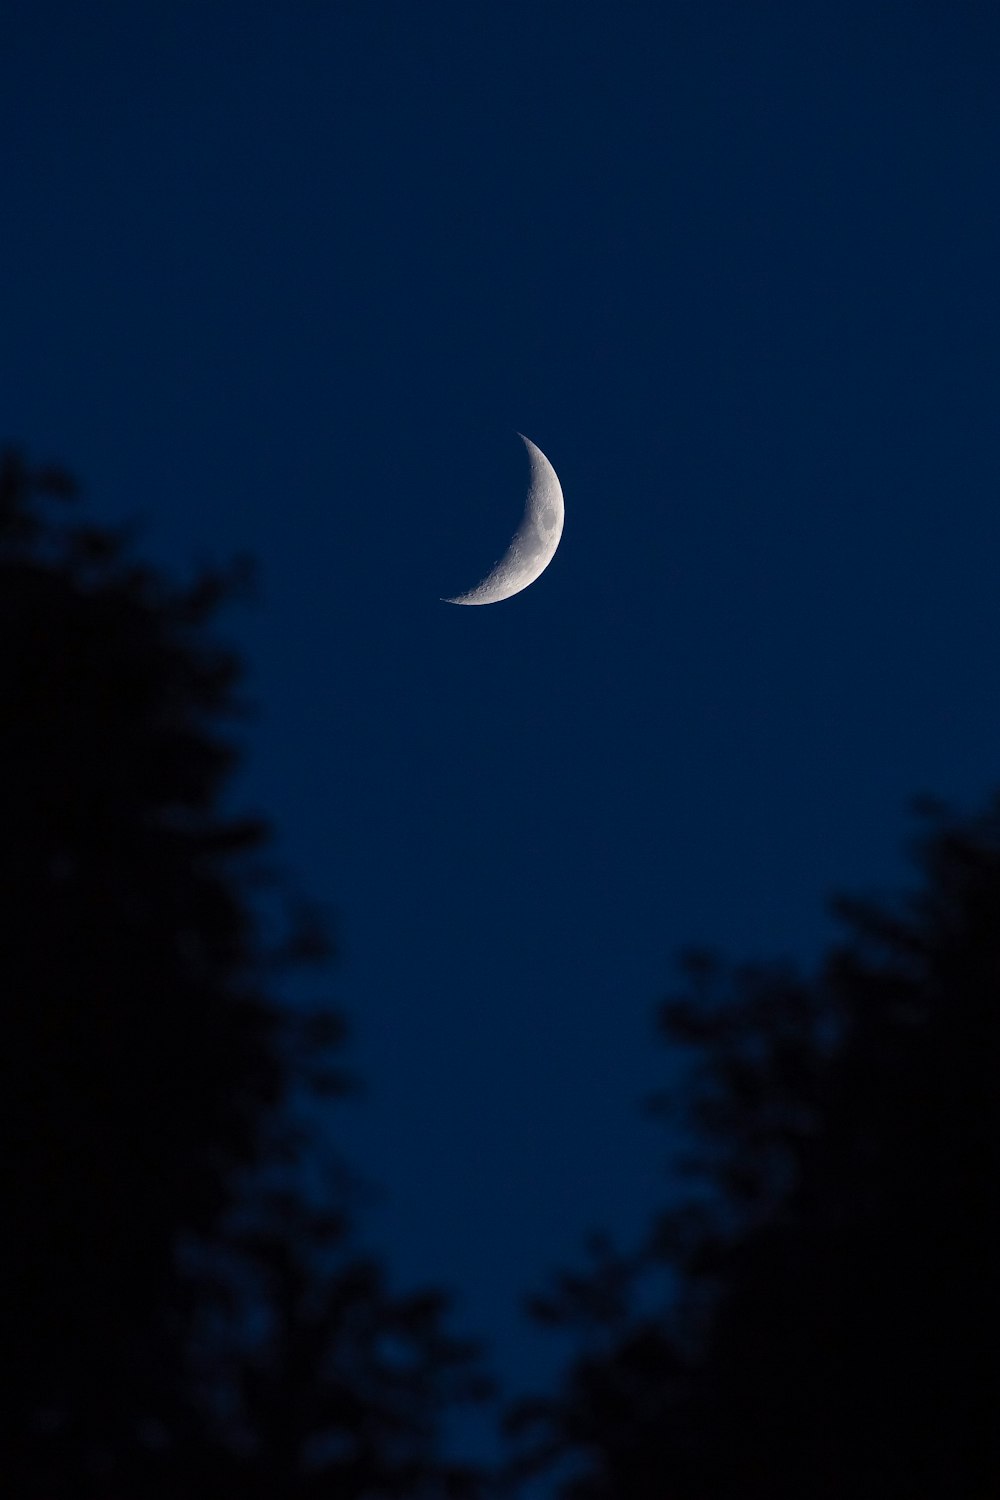 photo of crescent moon during nighttime